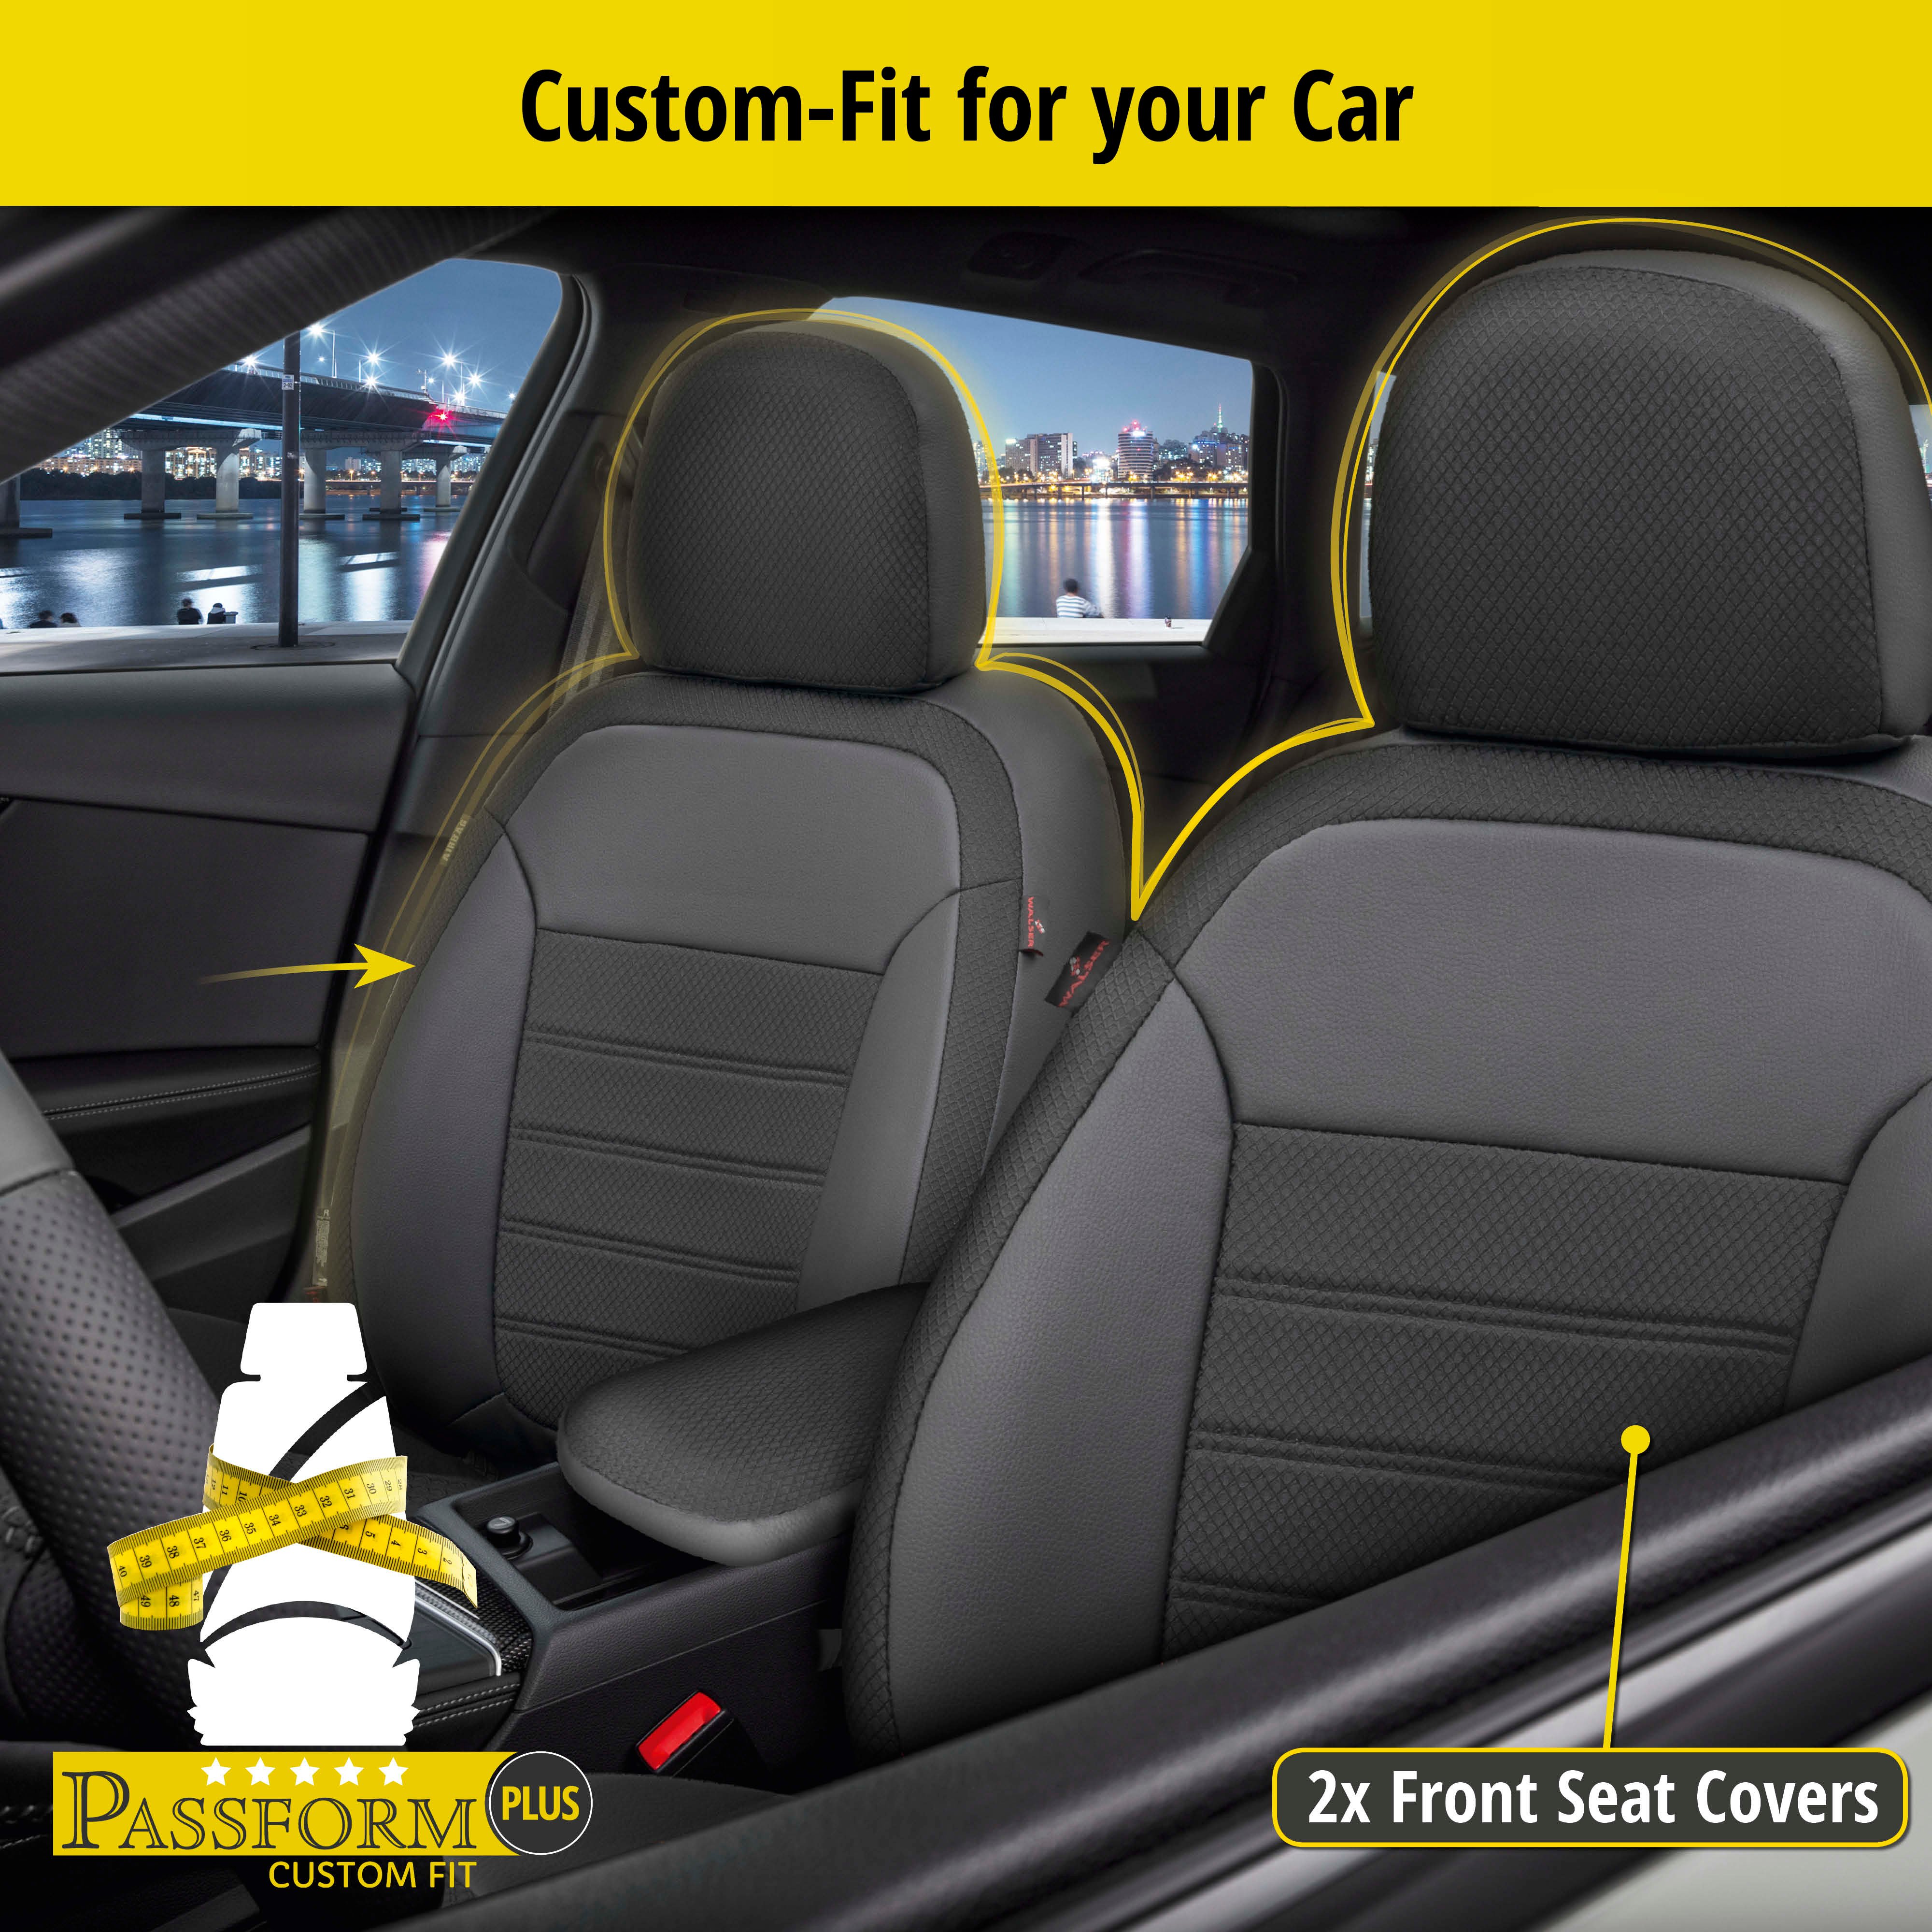 Seat Cover Aversa for Opel Mokka/Mokka X (J13) 06/2012-Today, 2 seat covers for normal seats